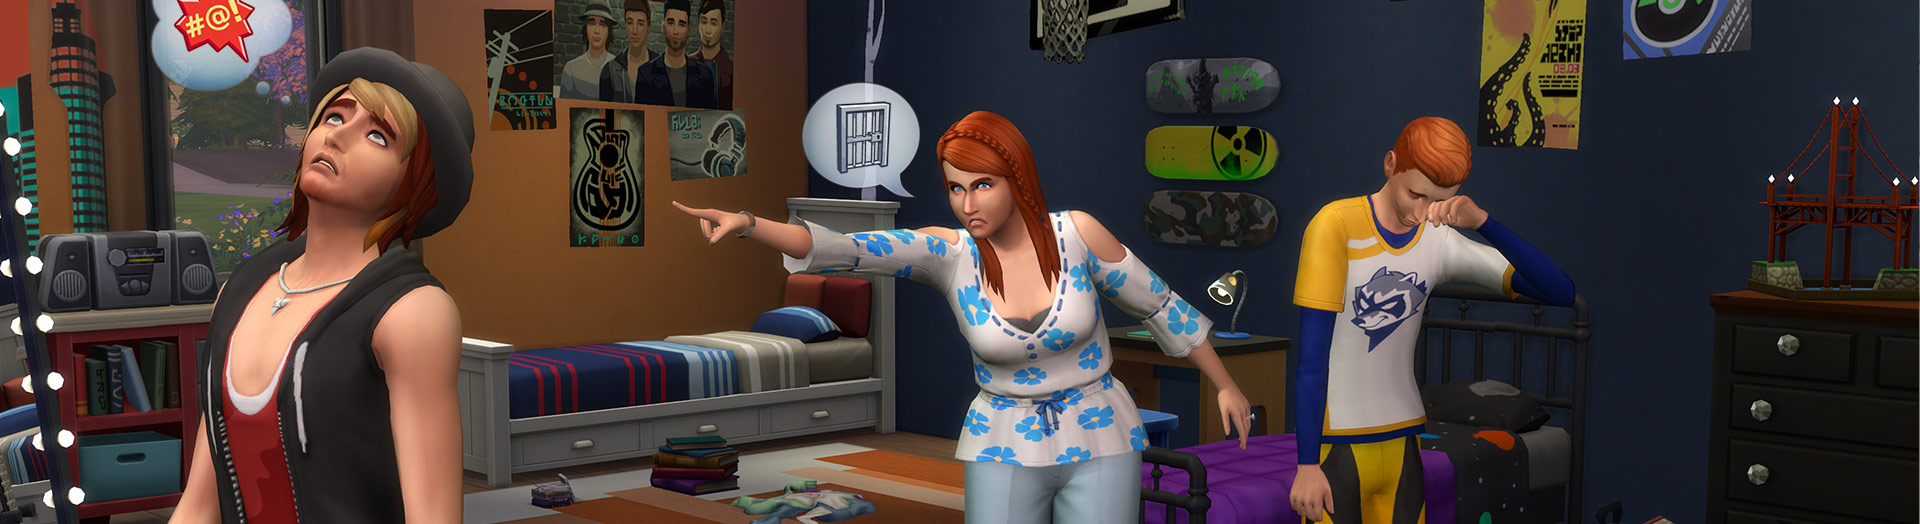 The Sims 4 Parenthood Game Pack: First Screenshots | SimsVIP